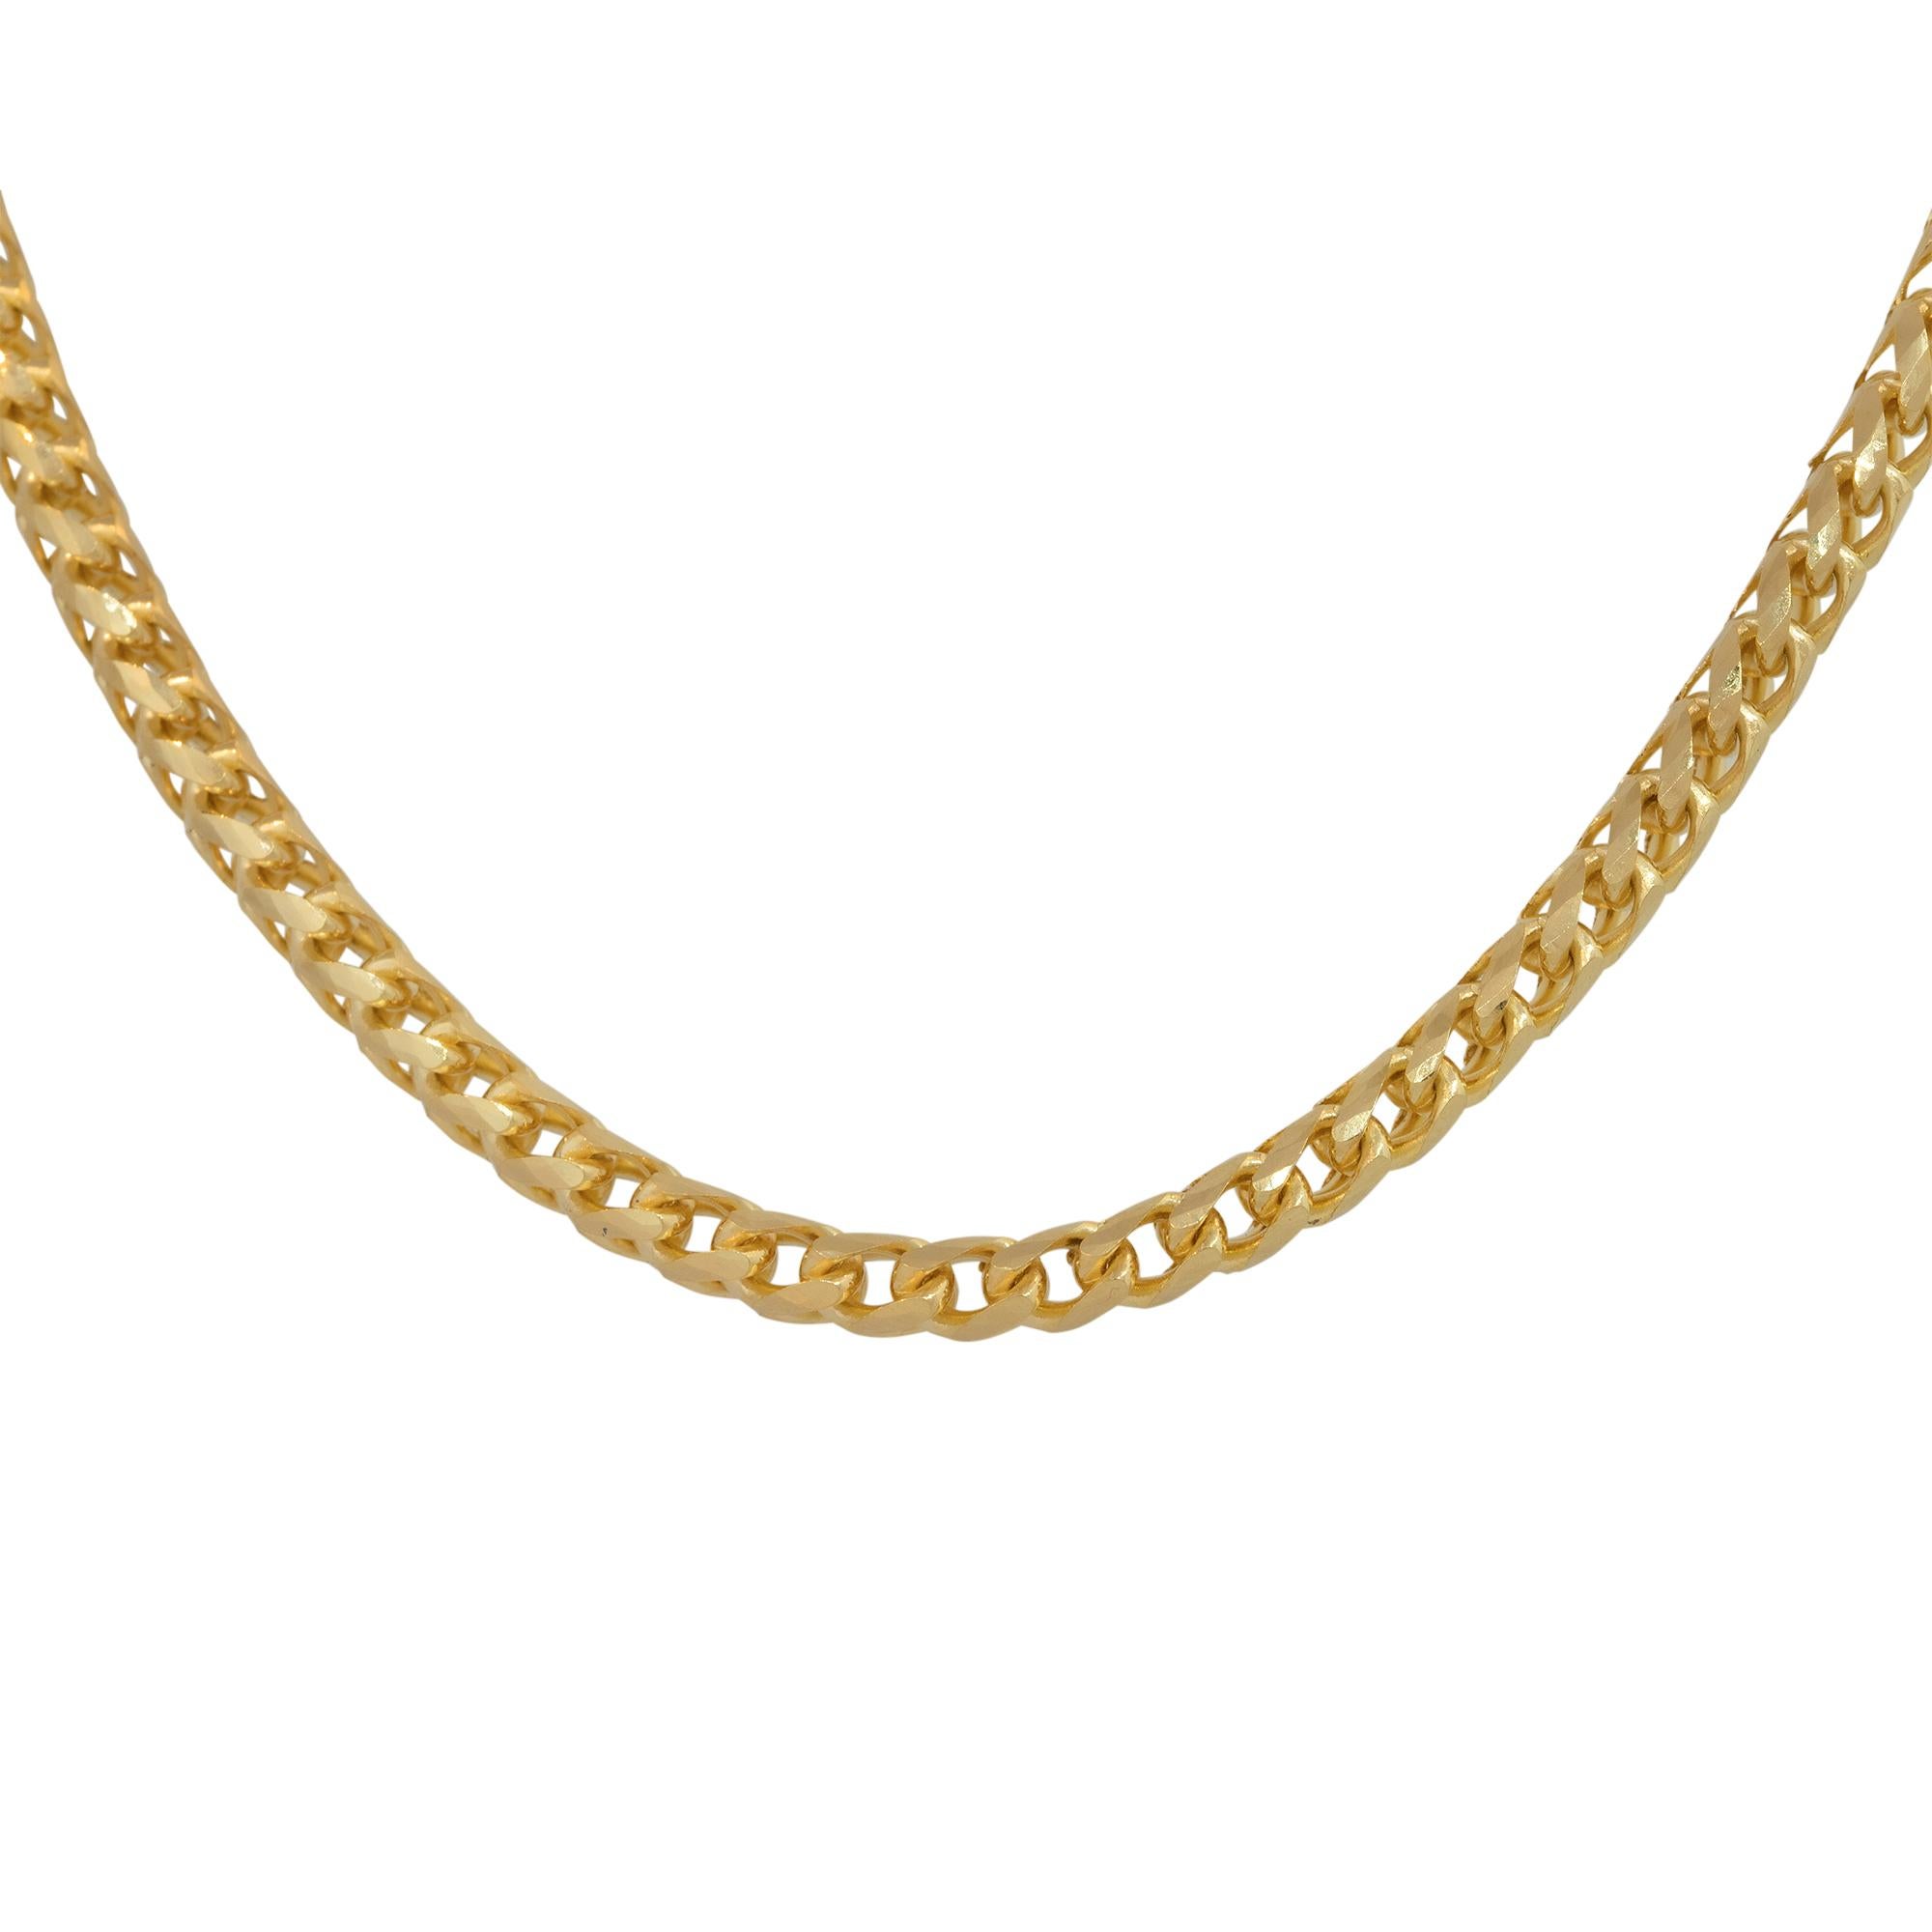 14k Yellow Gold 24″ Men's Franco Link Chain

Material: 14k Yellow Gold
Measurements: Necklace Measures 24″ in Length and 4.0mm in Thickness
Fastening: Spring Ring Clasp
Item Weight: 47.2g (30.4dwt)
Additional Details: This item comes with a